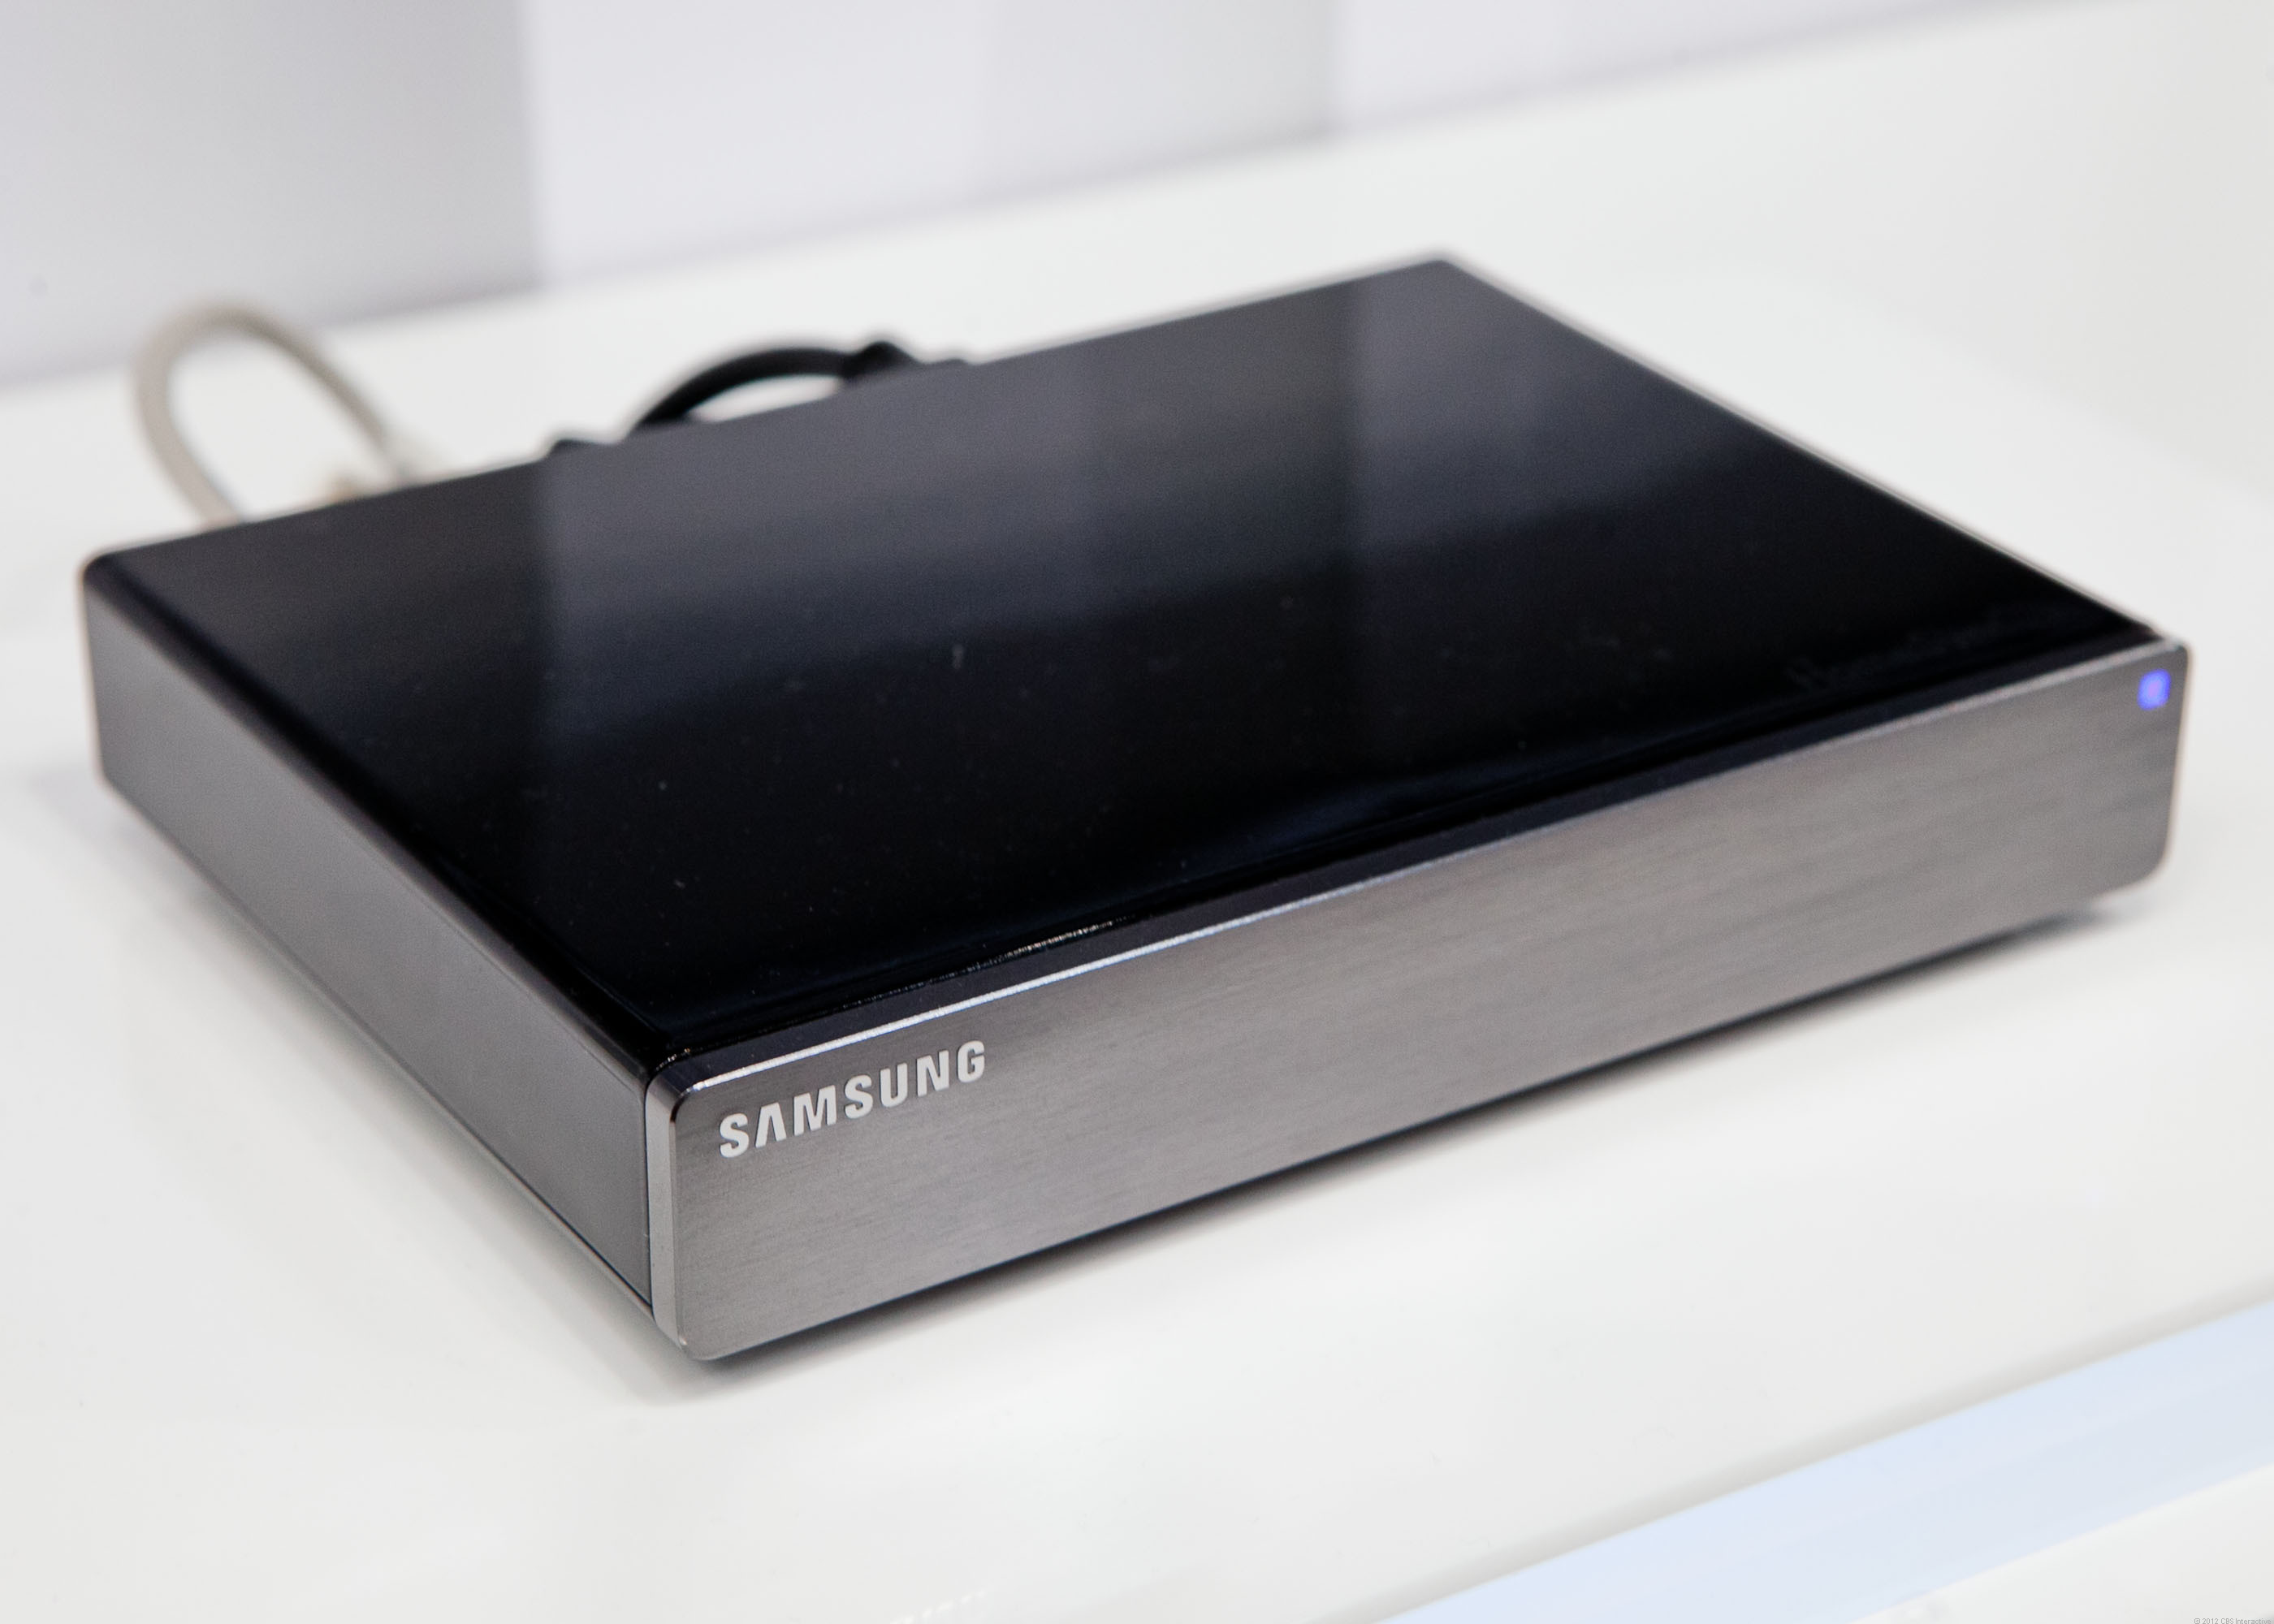 Geek insider, geekinsider, geekinsider. Com,, samsung's homesync brings media streaming to your television, uncategorized